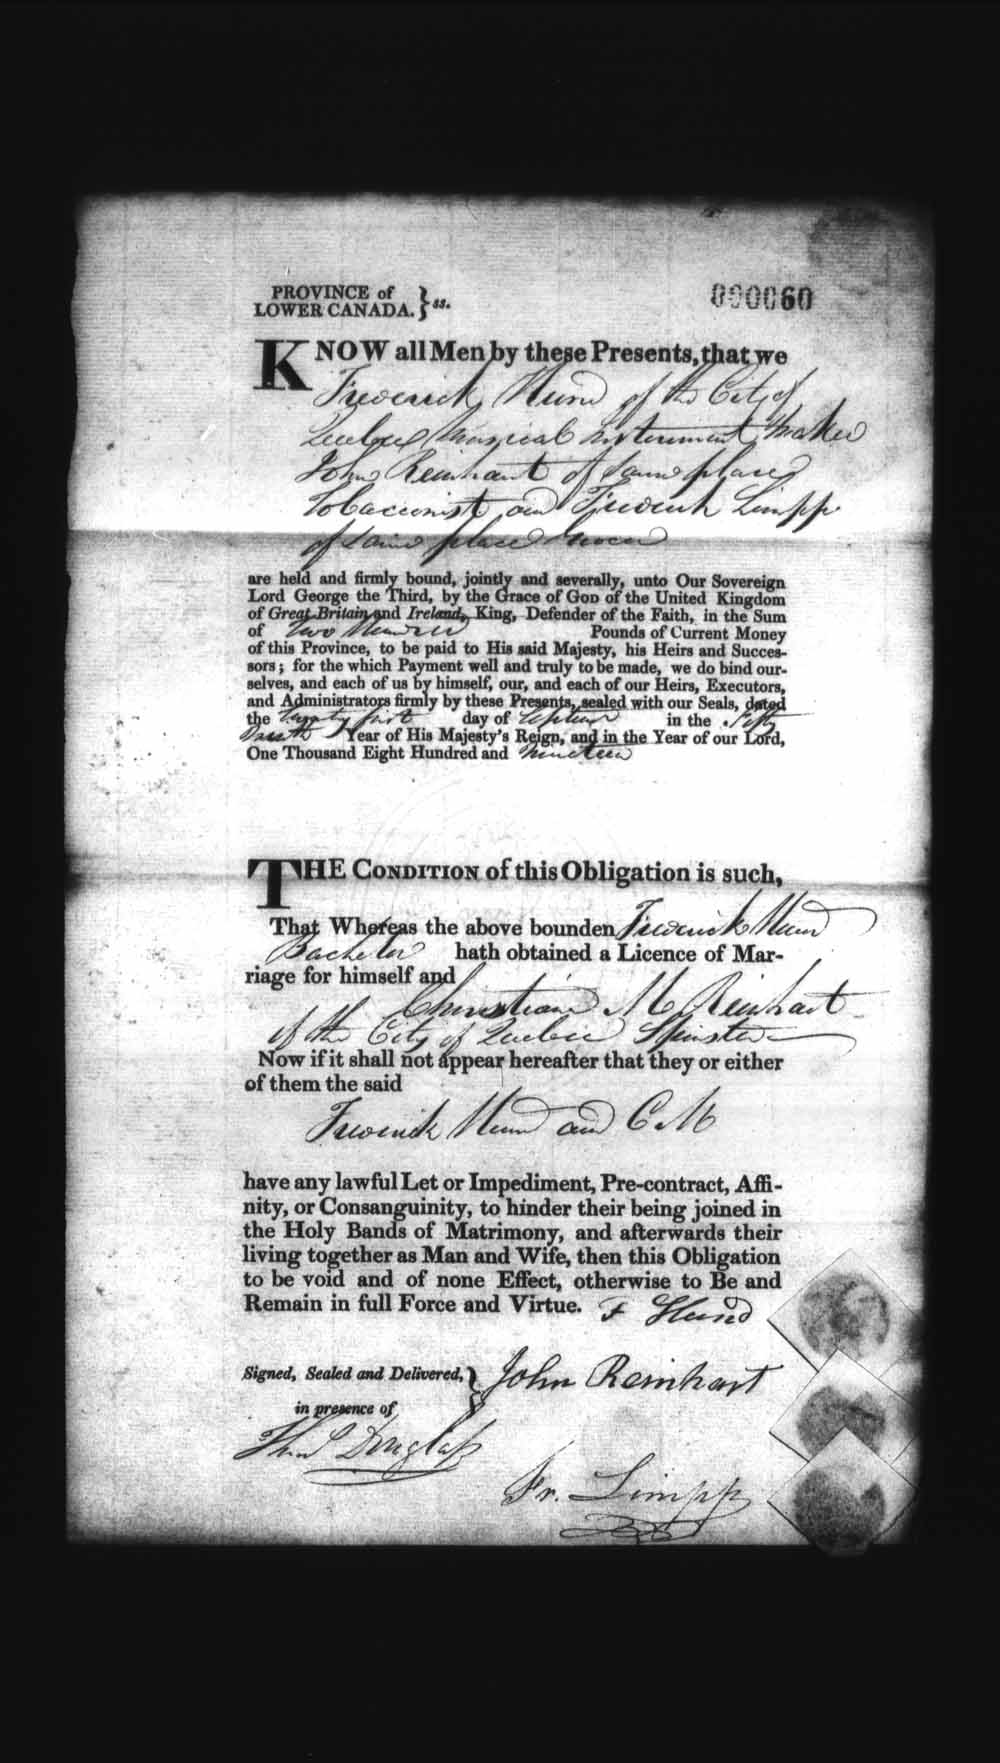 Digitized page of Upper and Lower Canada Marriage Bonds (1779-1865) for Image No.: e008235884